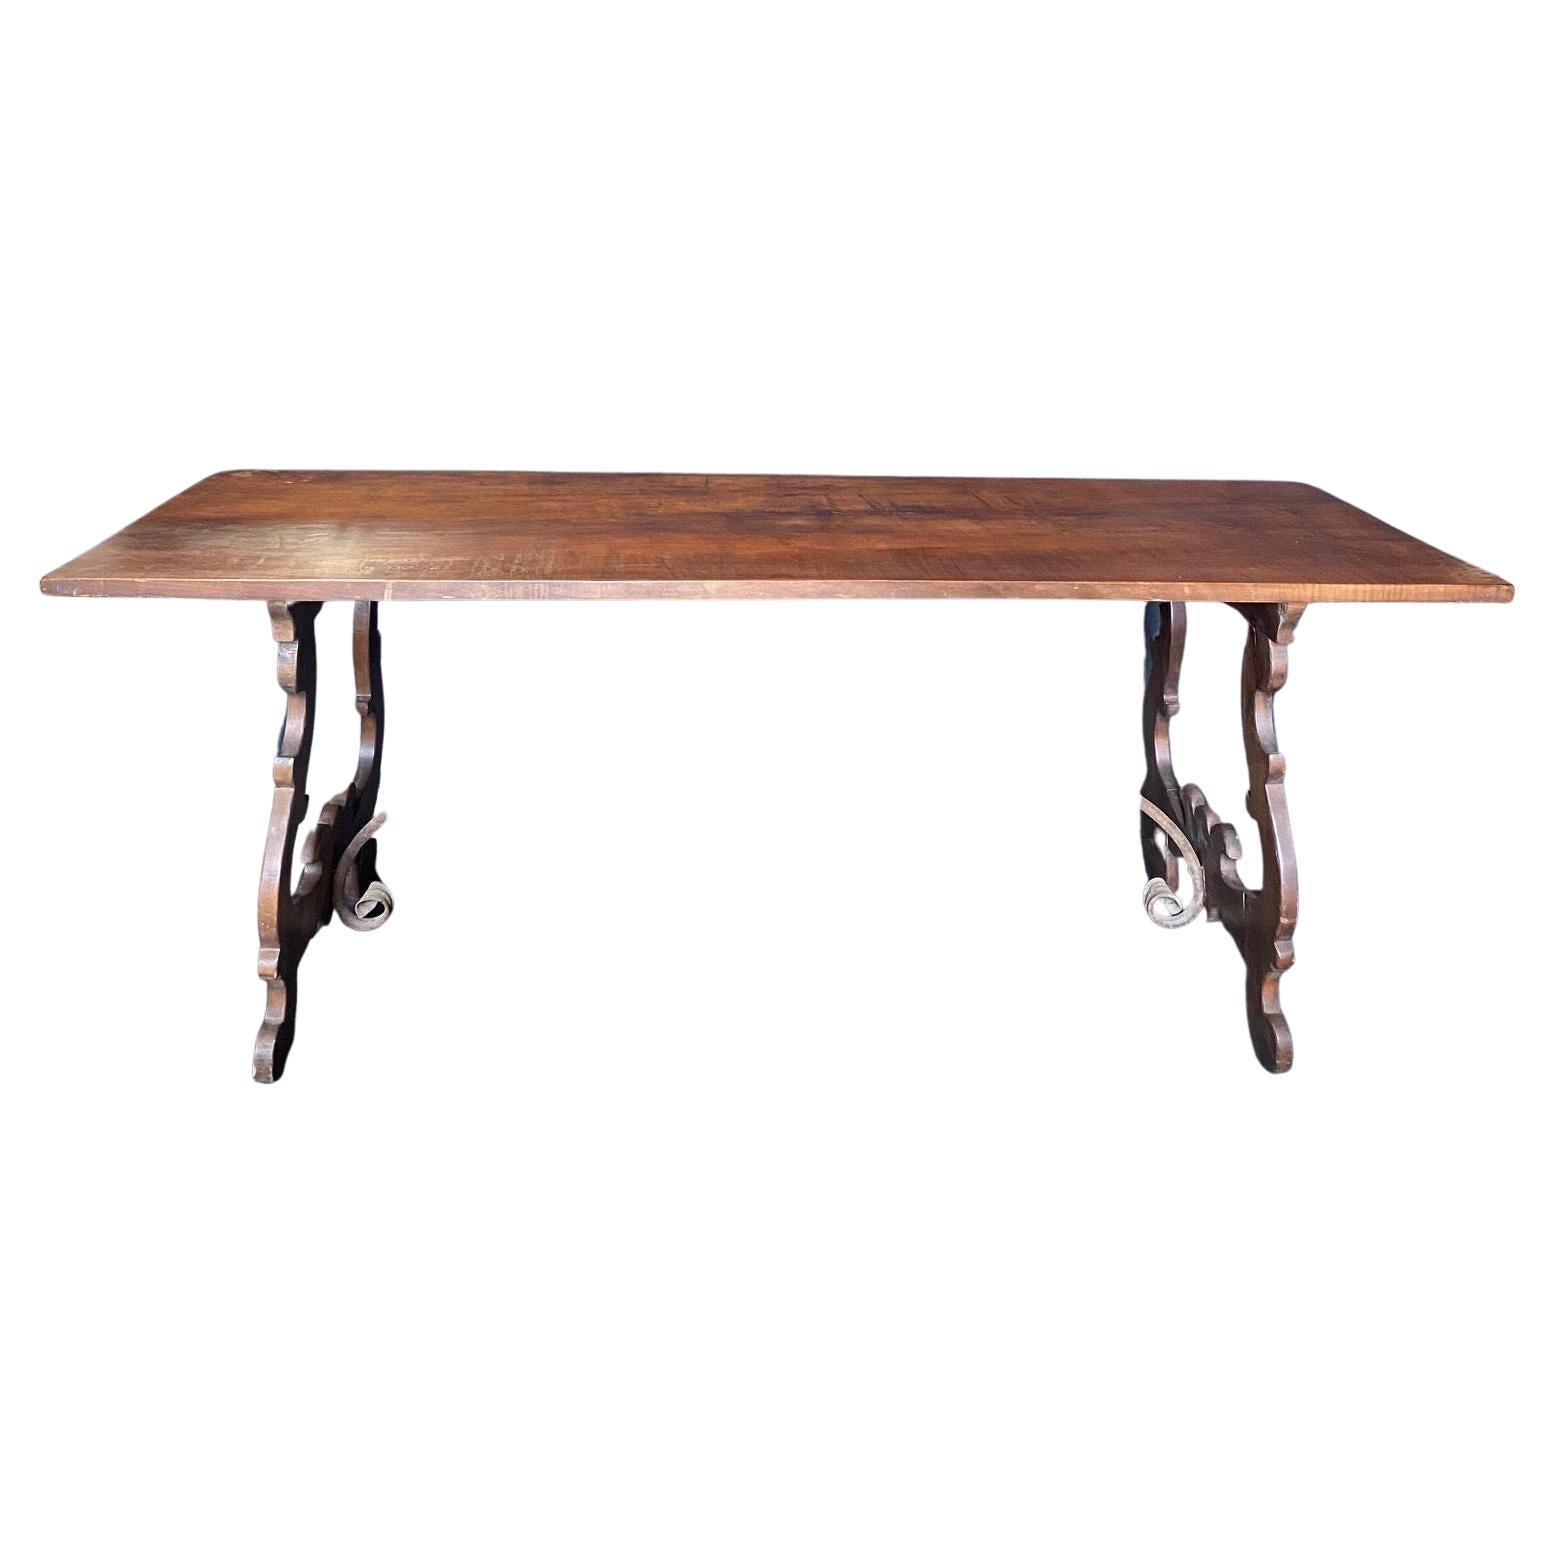 19th Century Italian Walnut Dining Table with Carved Lyre End Supports